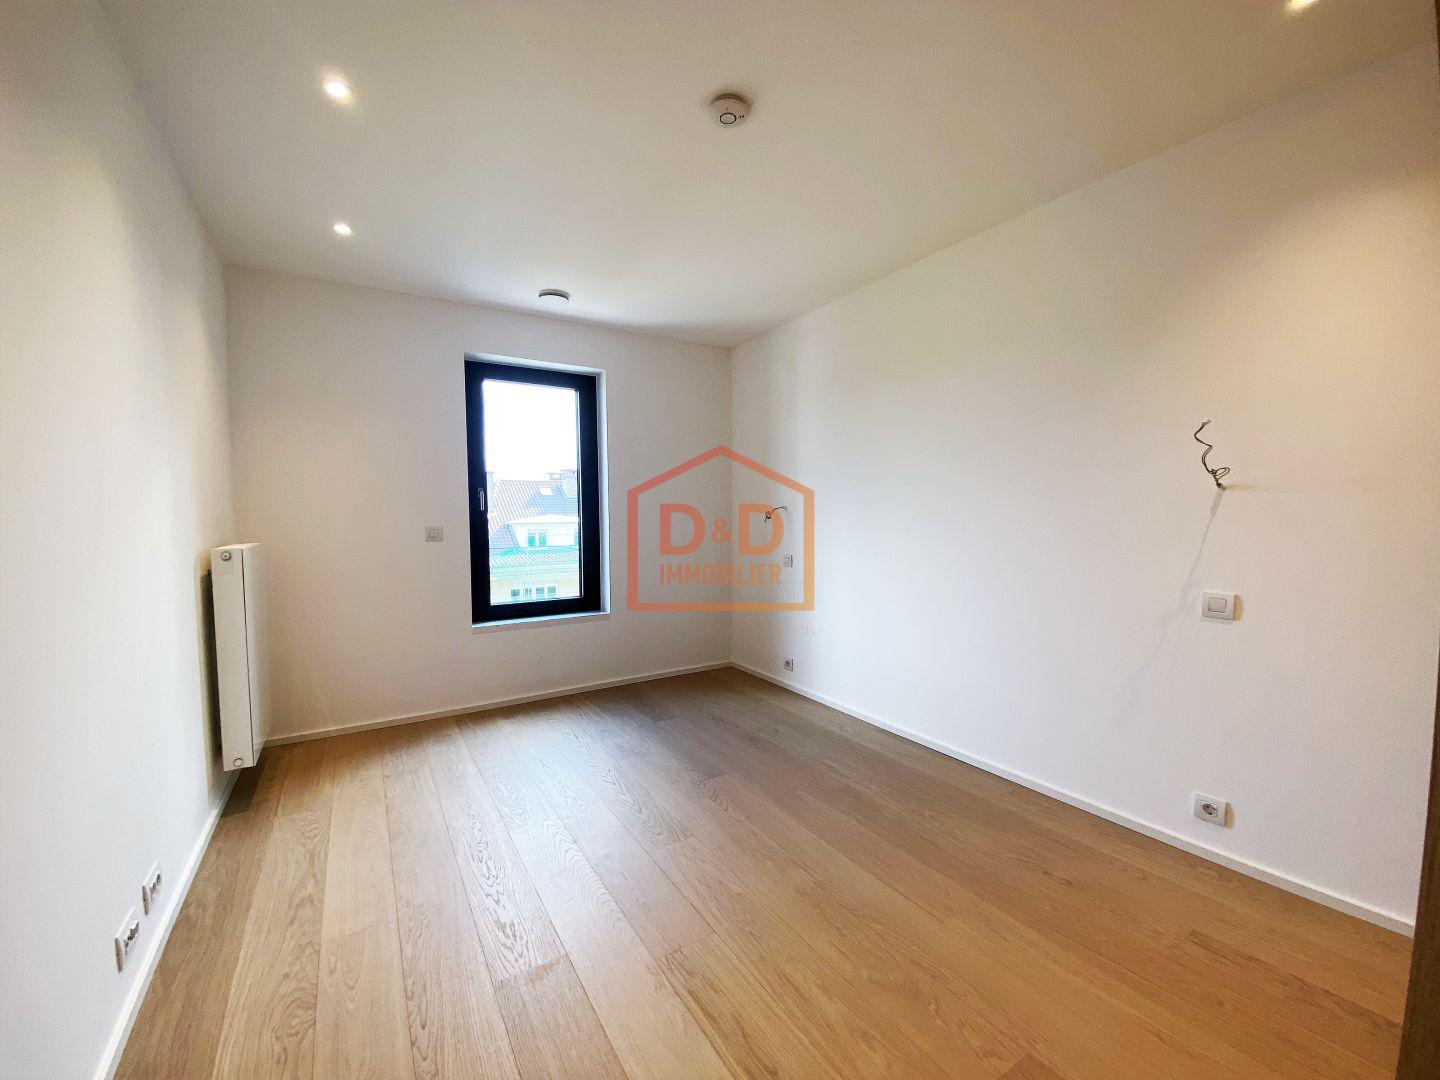 Appartement à Luxembourg-Belair, 45 m², 1 chambre, 1 700 €/mois